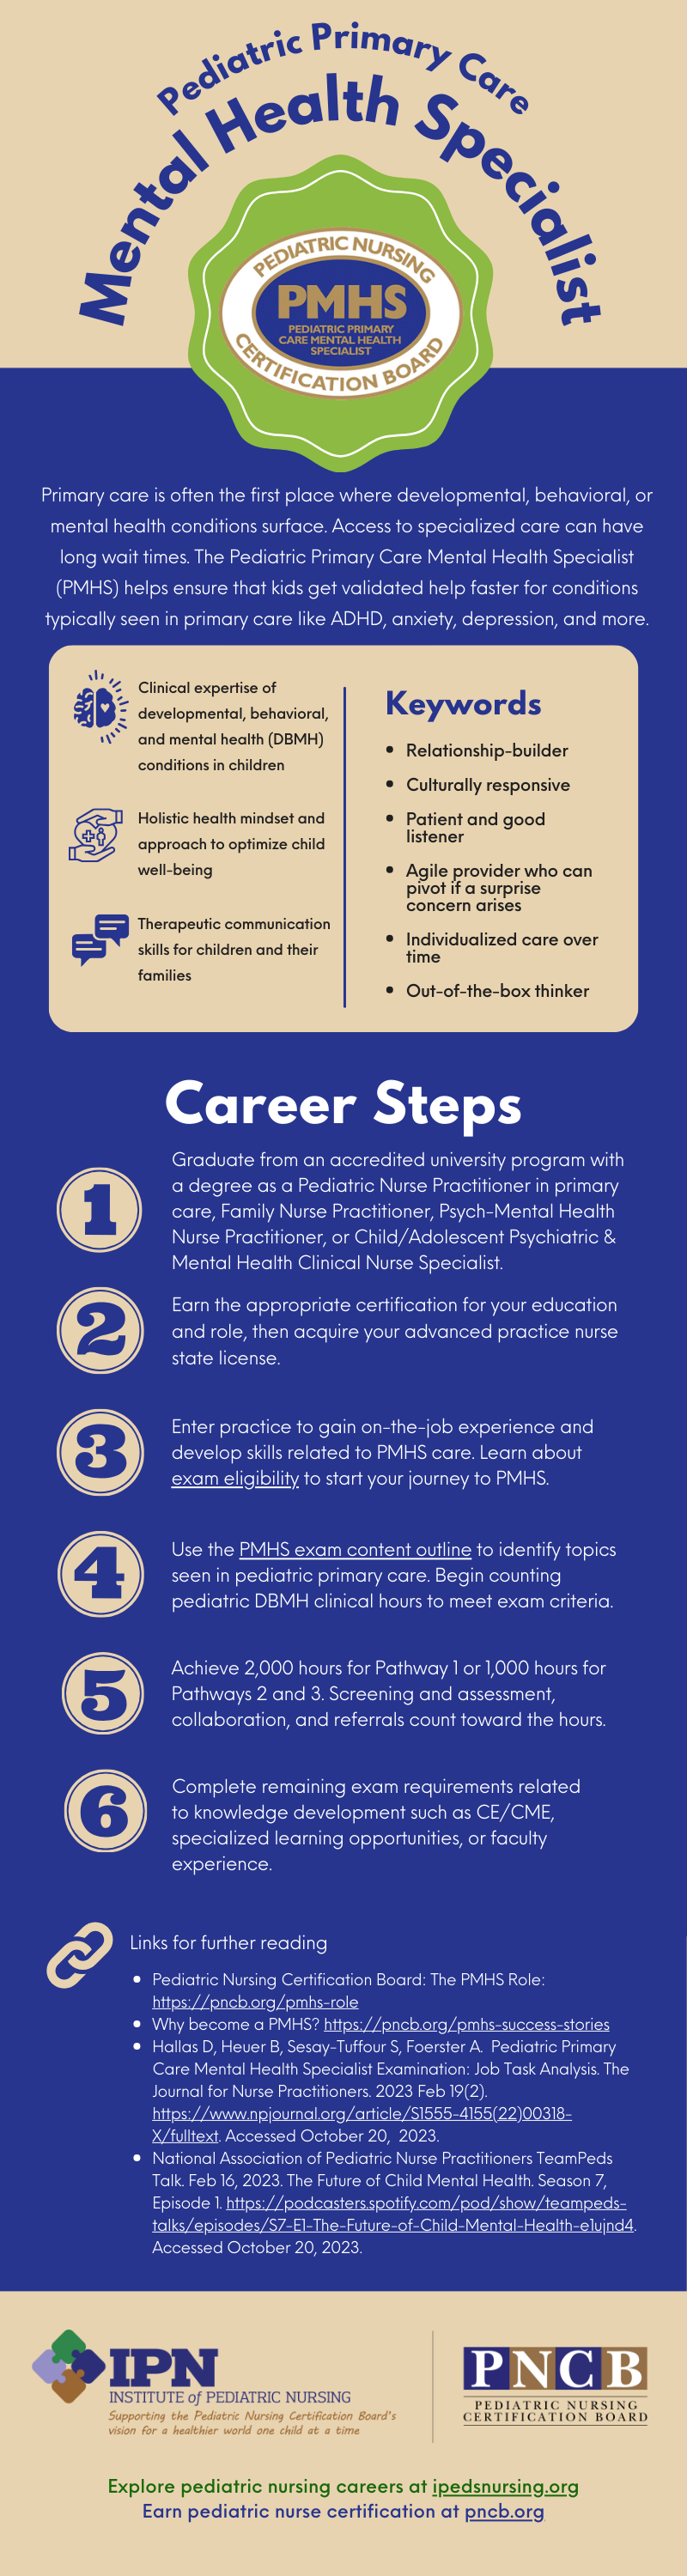 ID: Infographic describing steps to be a PMHS - see PDF for details